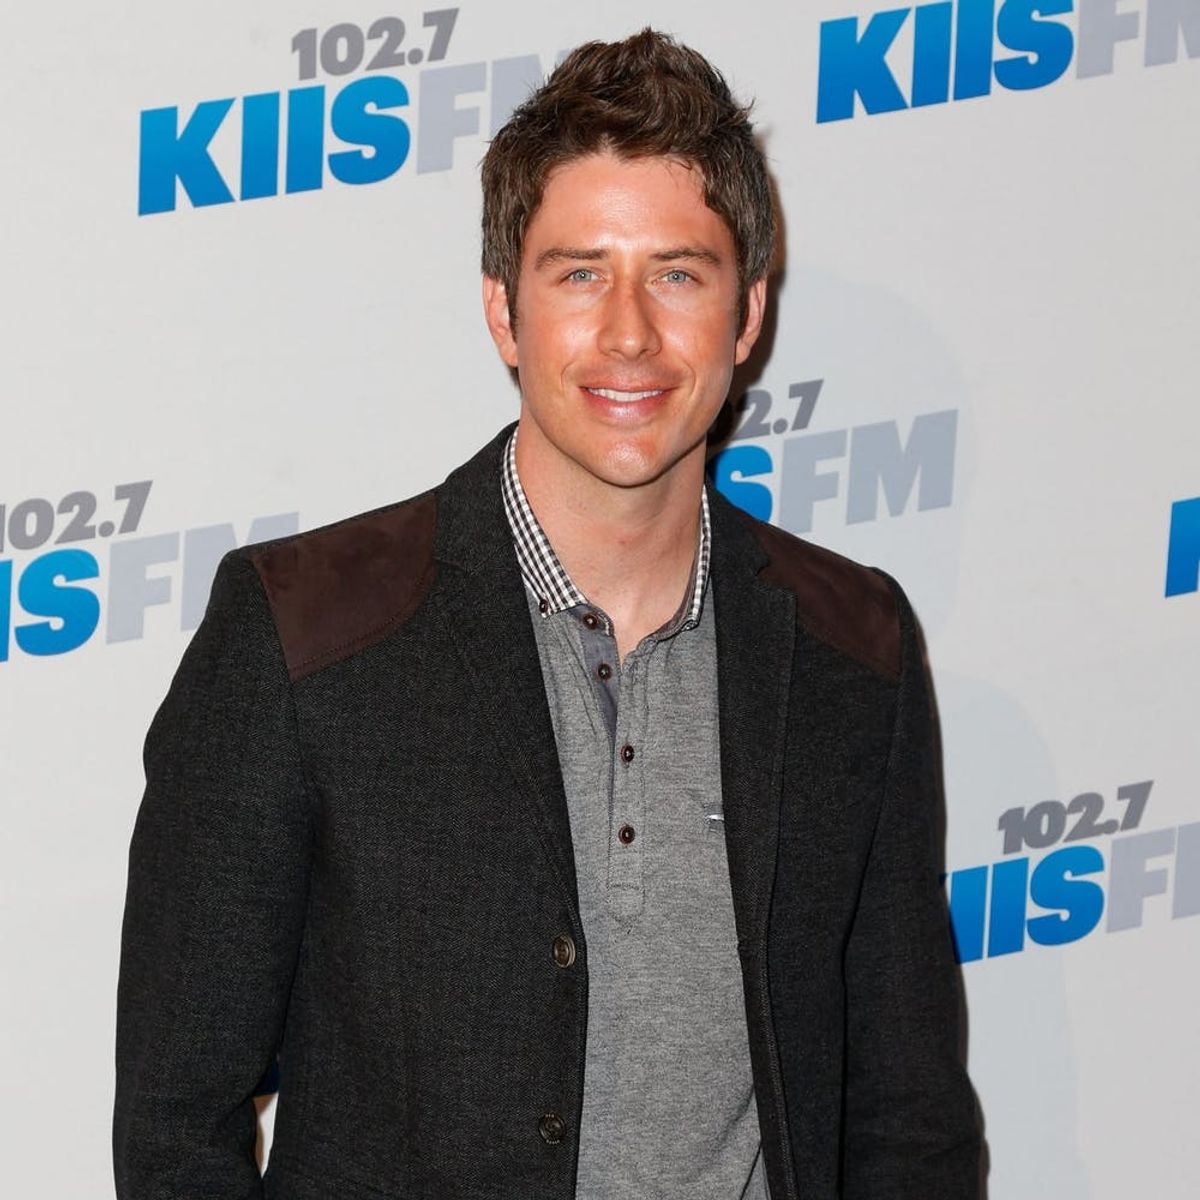 People Have a Lot of Feelings About Arie Luyendyk Jr. As the Next Bachelor